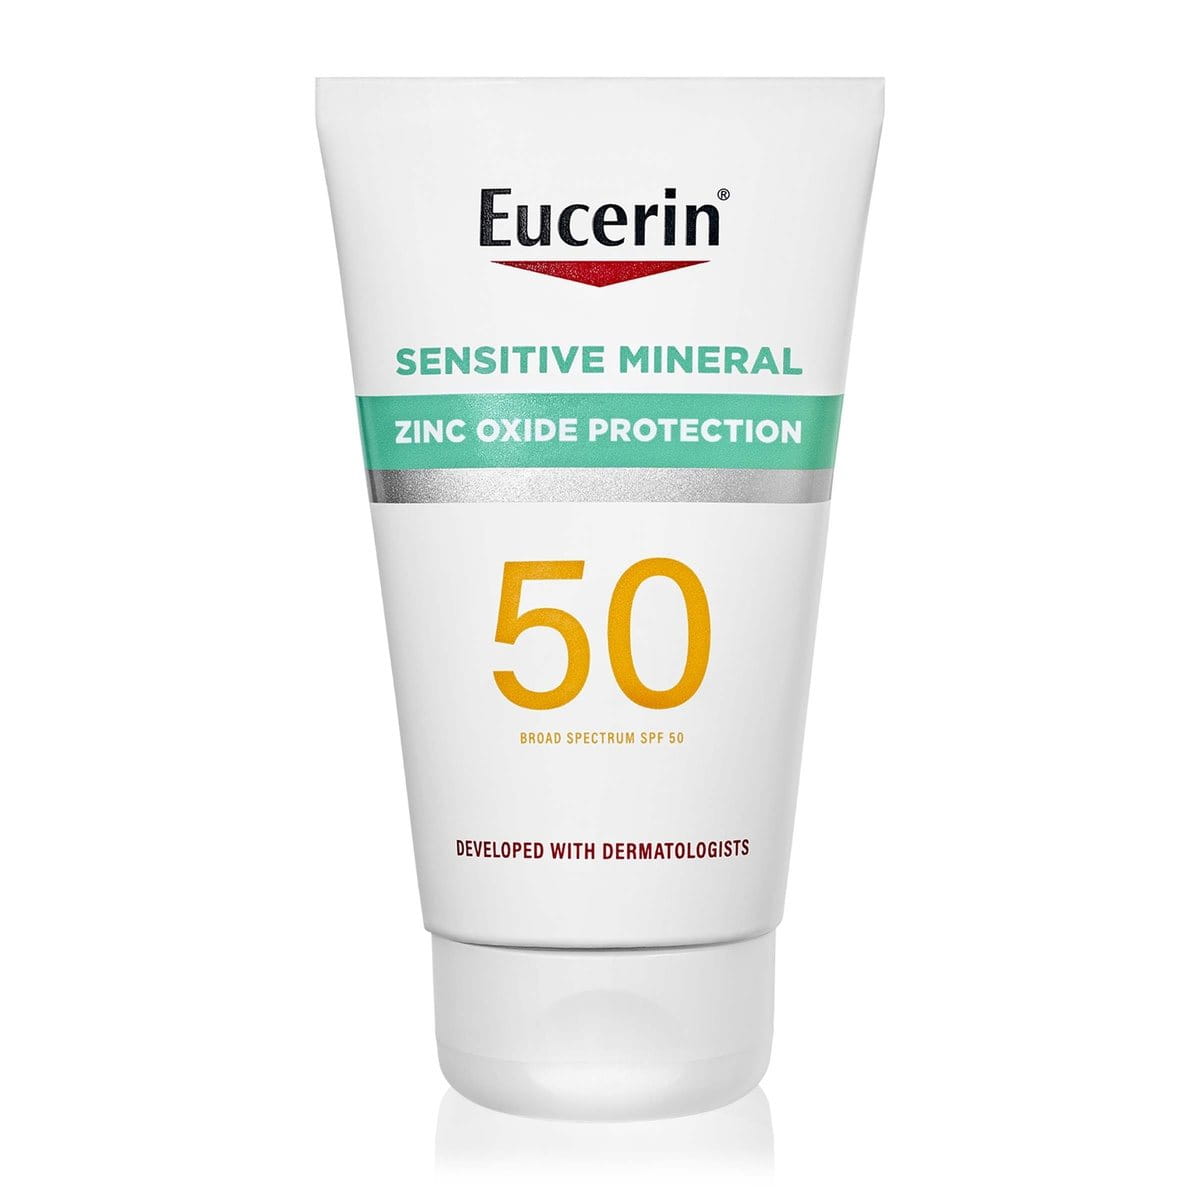 Eucerin Sun Oil Control SPF 50 Face Sunscreen Lotion with Oil Absorbing  Minerals - 74 ml - INCI Beauty